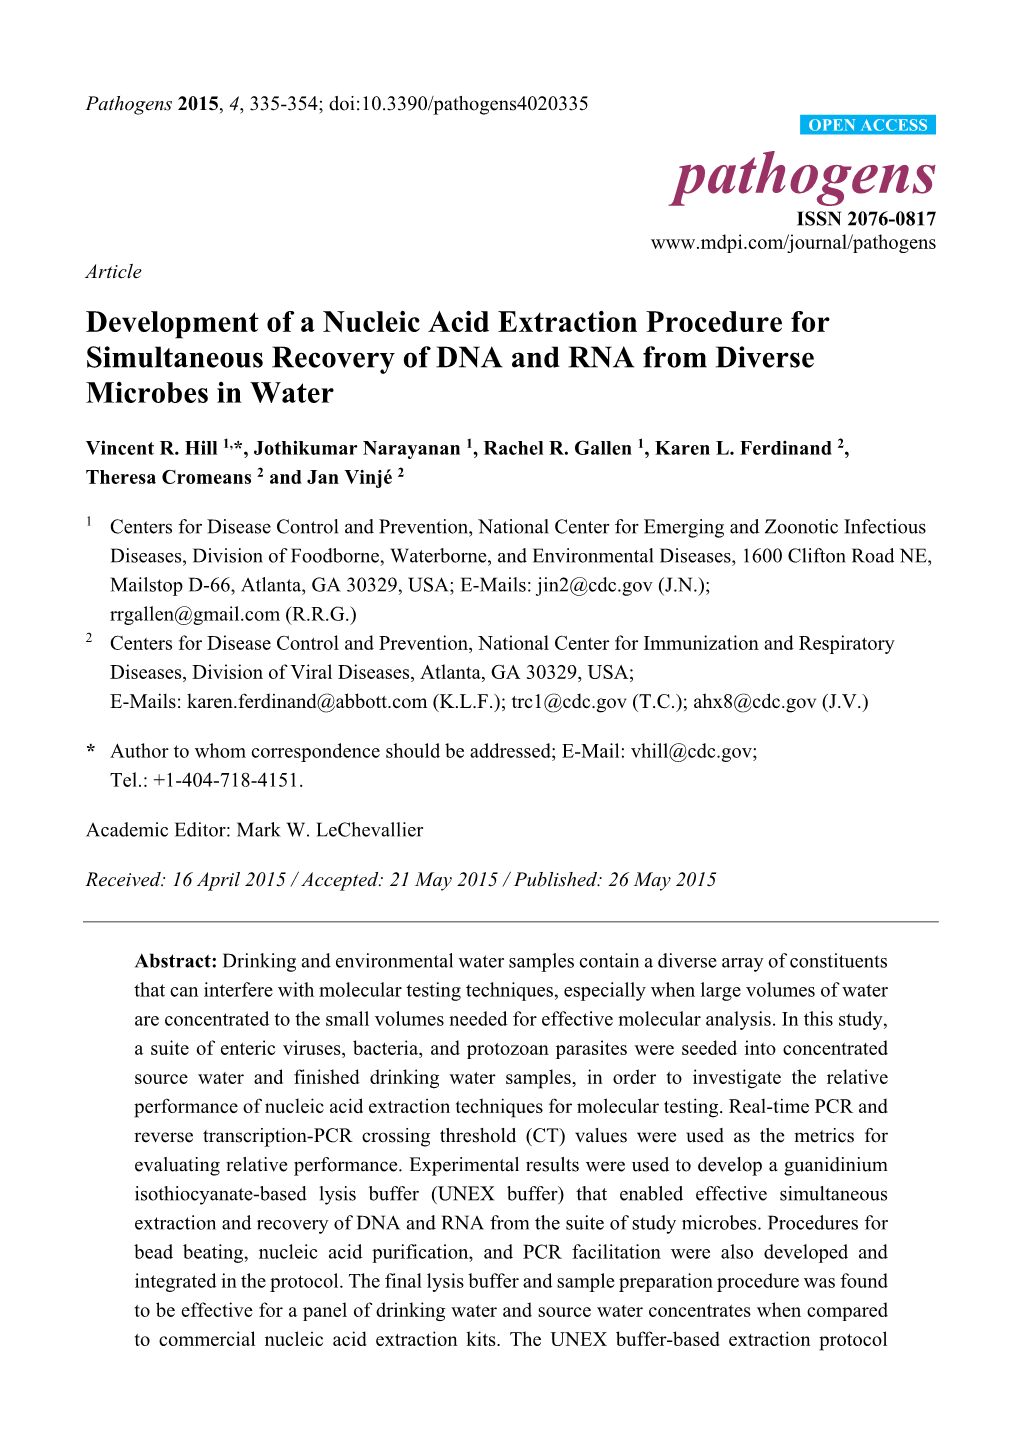 Development of a Nucleic Acid Extraction Procedure for Simultaneous Recovery of DNA and RNA from Diverse Microbes in Water